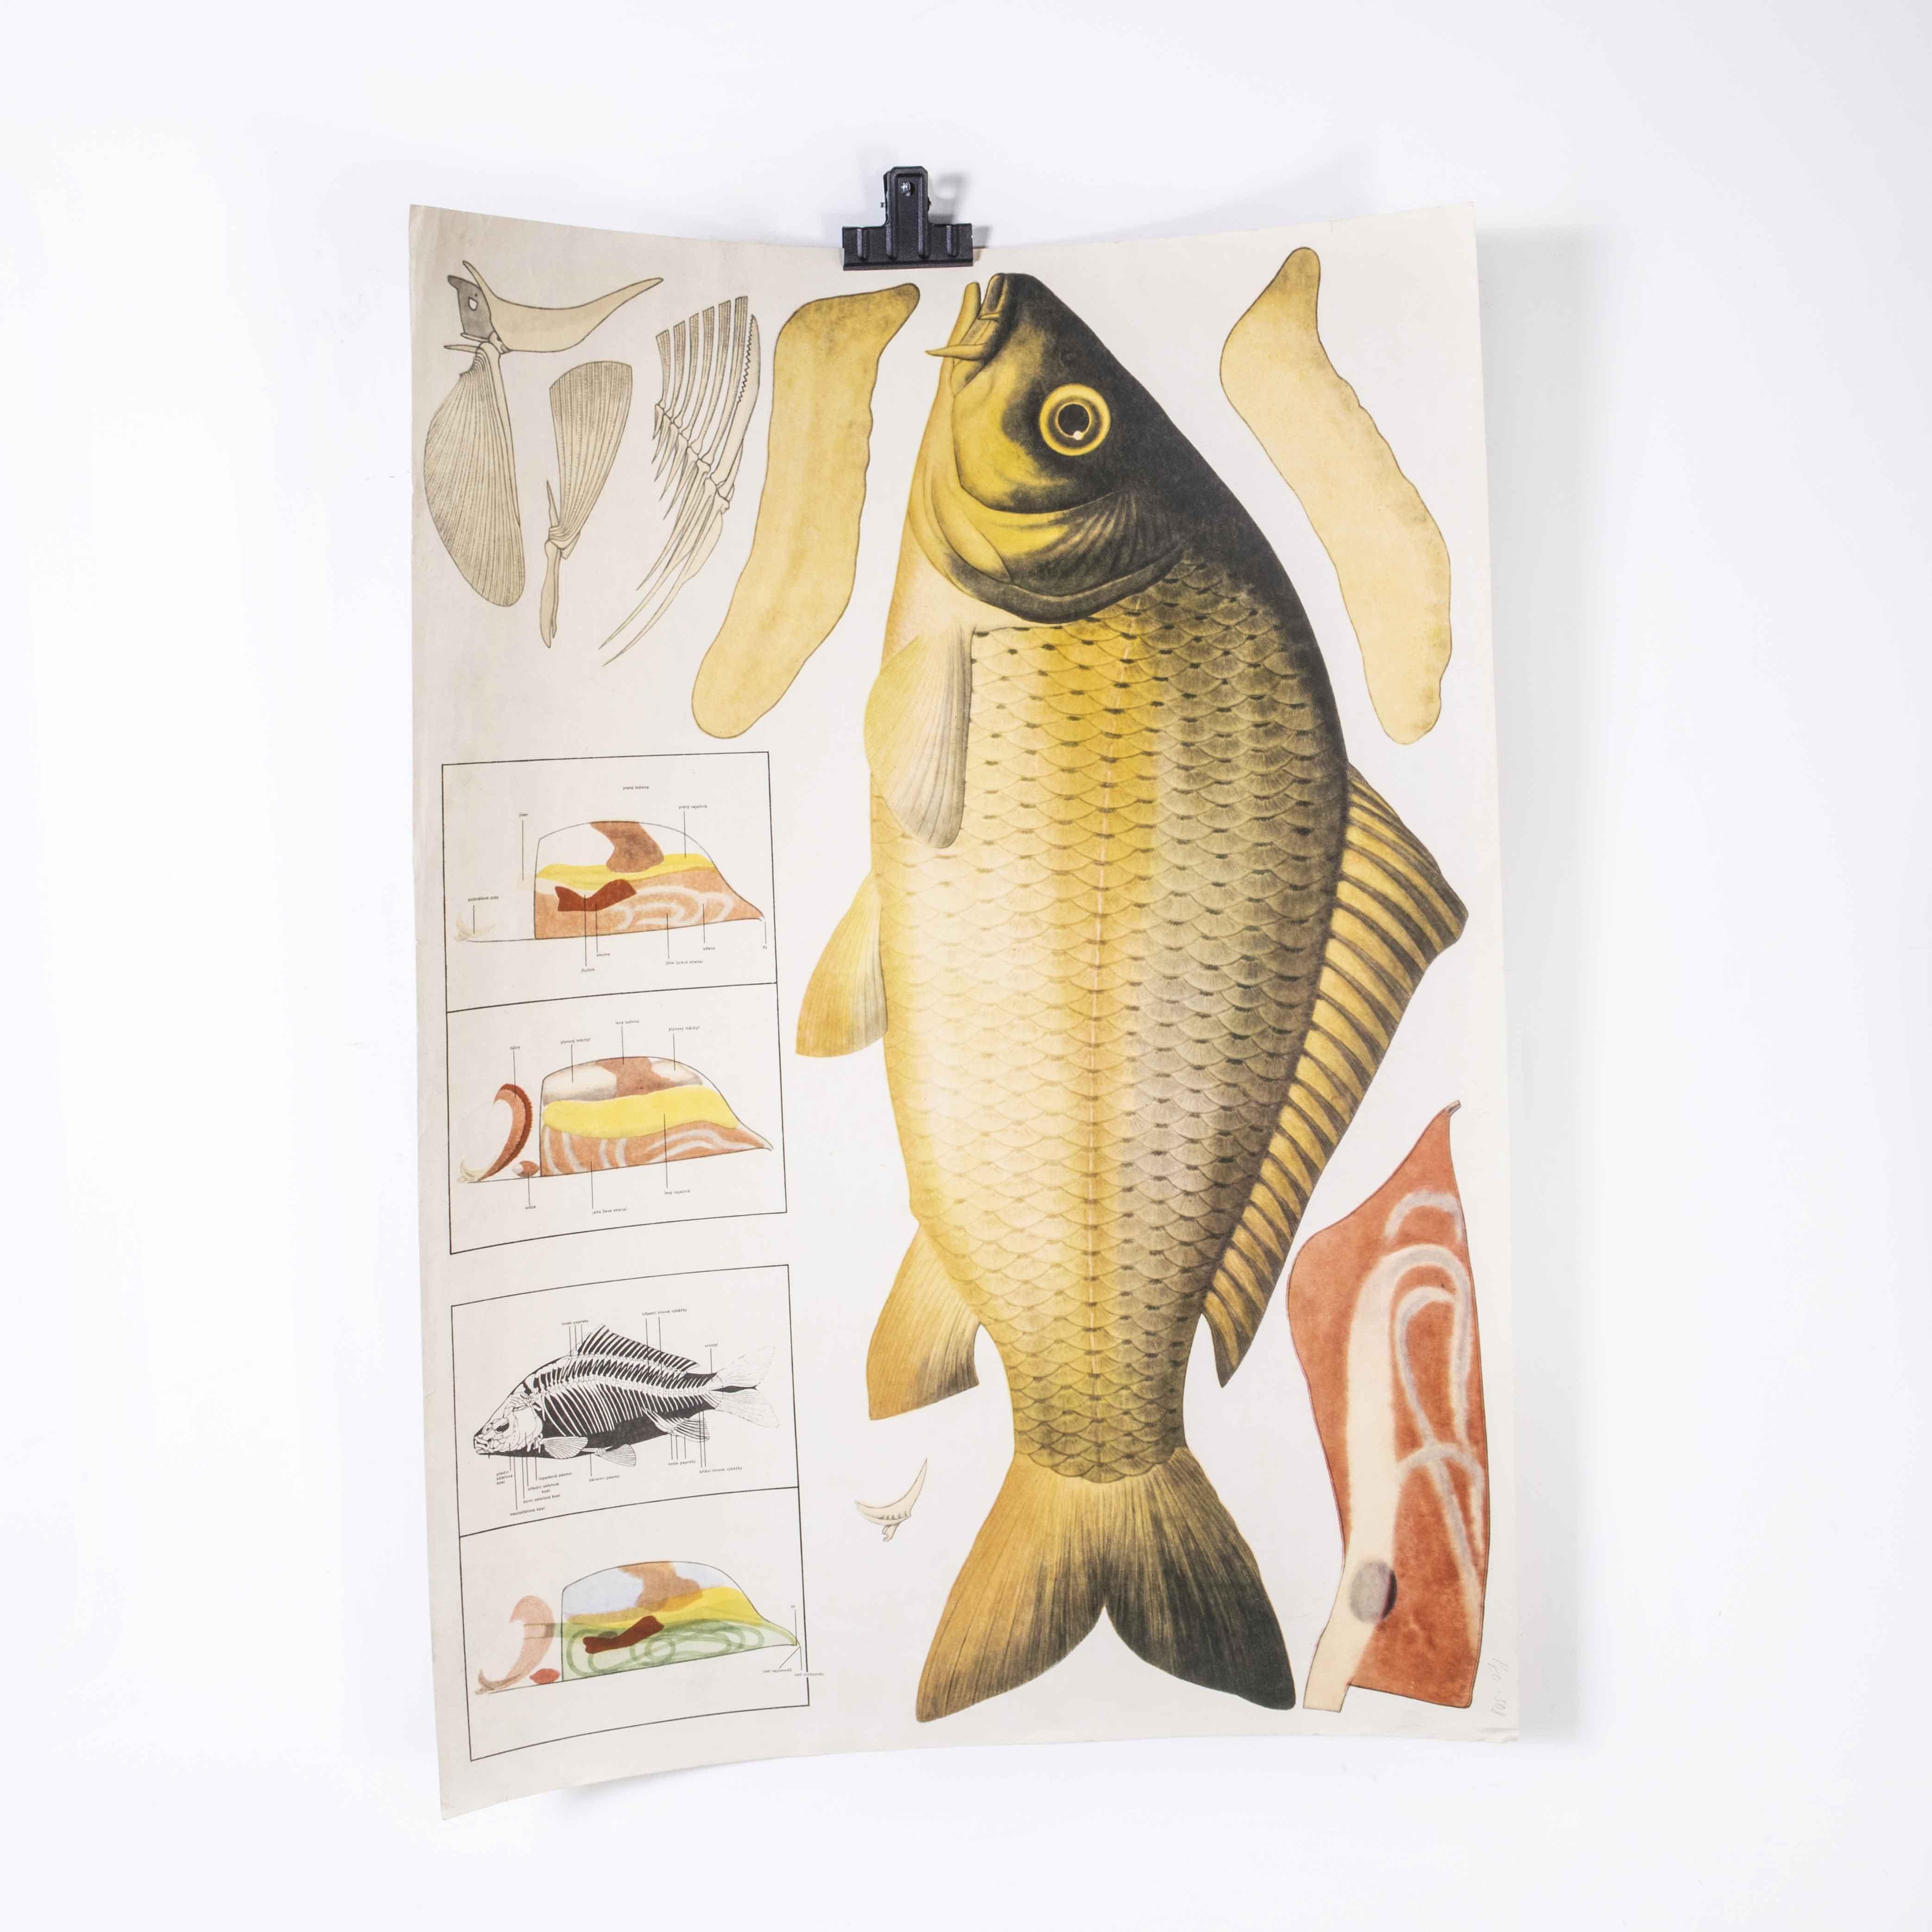 Early 20th century fish educational poster
Early 20th century fish educational poster. Early 20th century Czechoslovakian educational chart. A rare and vintage wall chart from the Czech Republic illustrating the bone structure of a common carp.